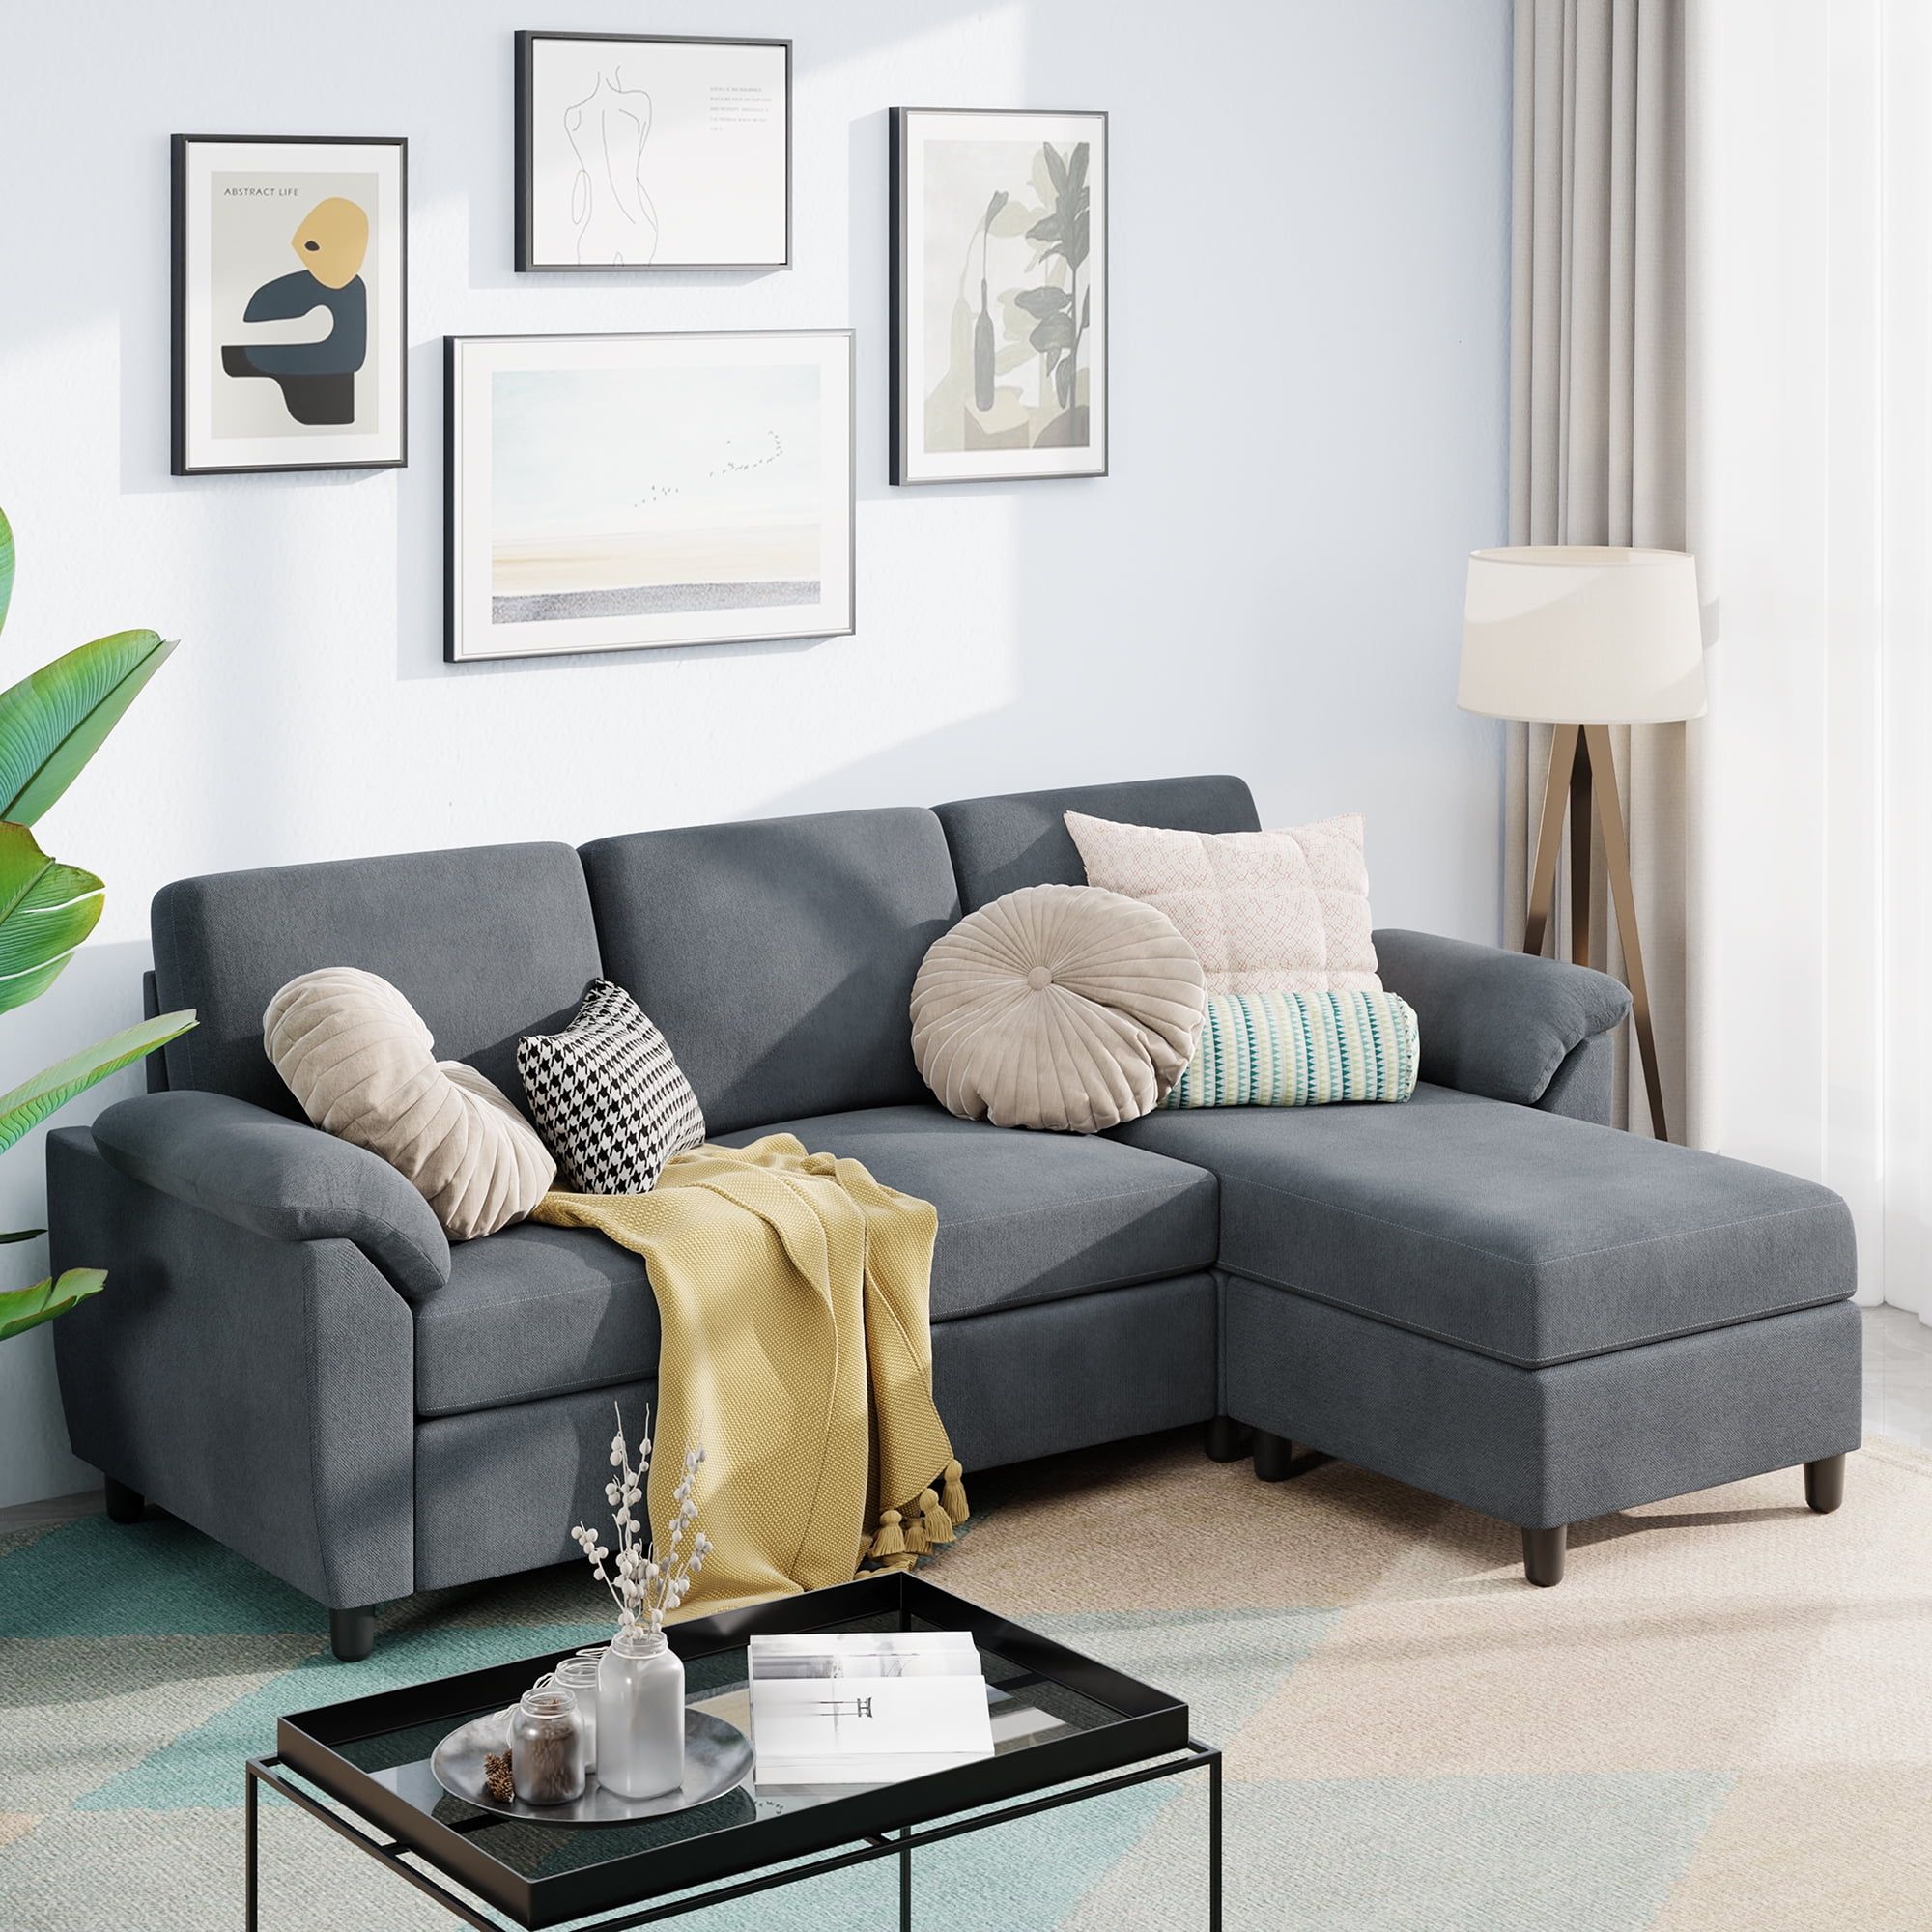 Sobaniilo 79" Convertible Sectional Sofa Couch, 3 Seat L Shaped Sofa With  Removable Pillows Linen Fabric Small Couch Mid Century For Living Room,  Apartment And Office (Gray) – Walmart Within 3 Seat Convertible Sectional Sofas (Photo 5 of 15)